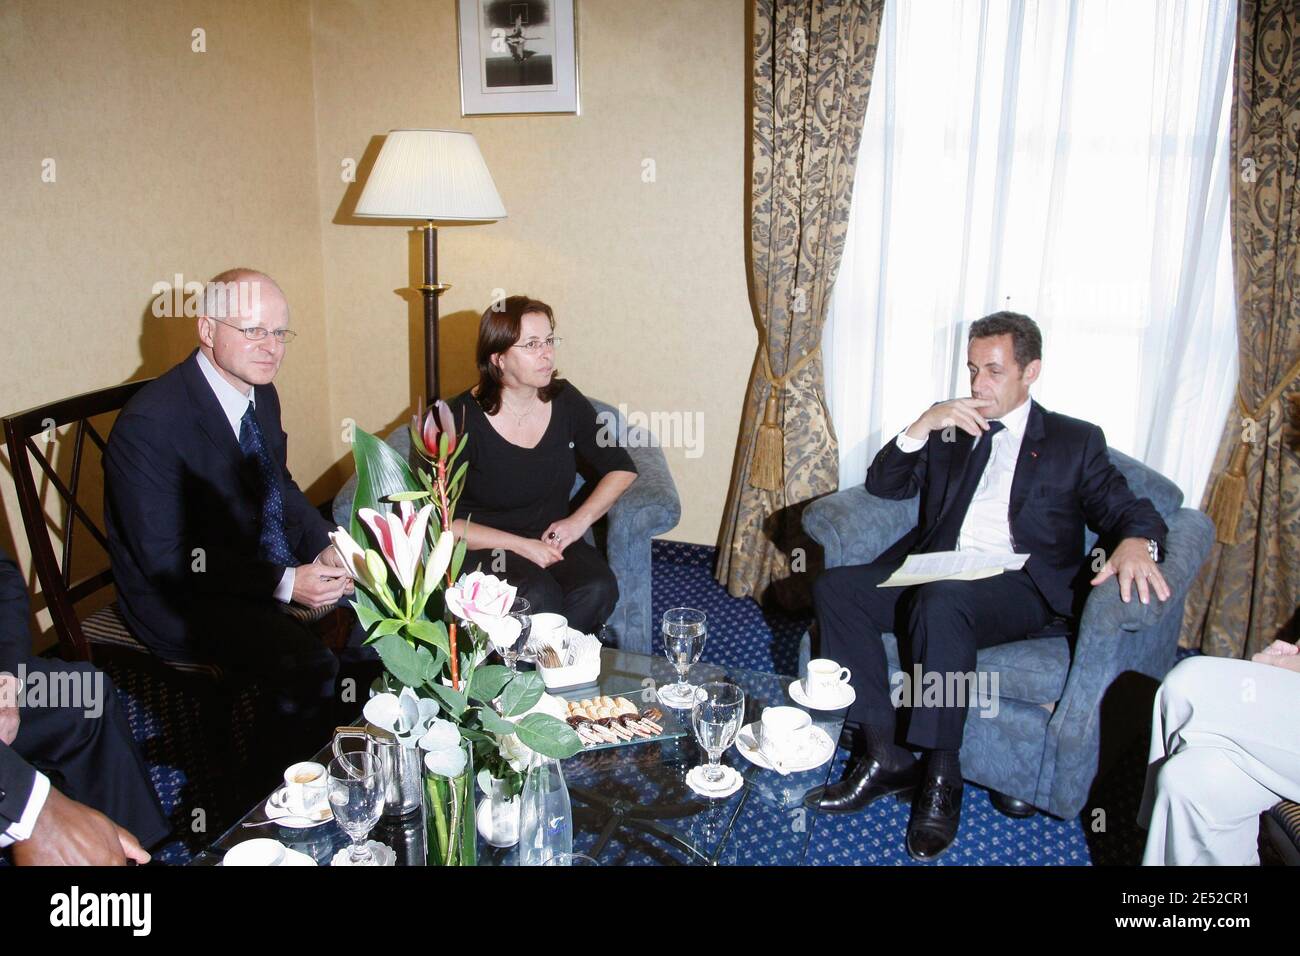 French President Nicolas Sarkozy speaks with Noam Shalit and Aviva Shalit, the parents of Gilad Shalit, the Israeli soldier captured by Palestinian militants two years ago on the Israel-Gaza border, during a meeting at King David hotel in Jerusalem, Israel, on June 23, 2008. Photo by Ludovic/Pool/ABACAPRESS.COM Stock Photo